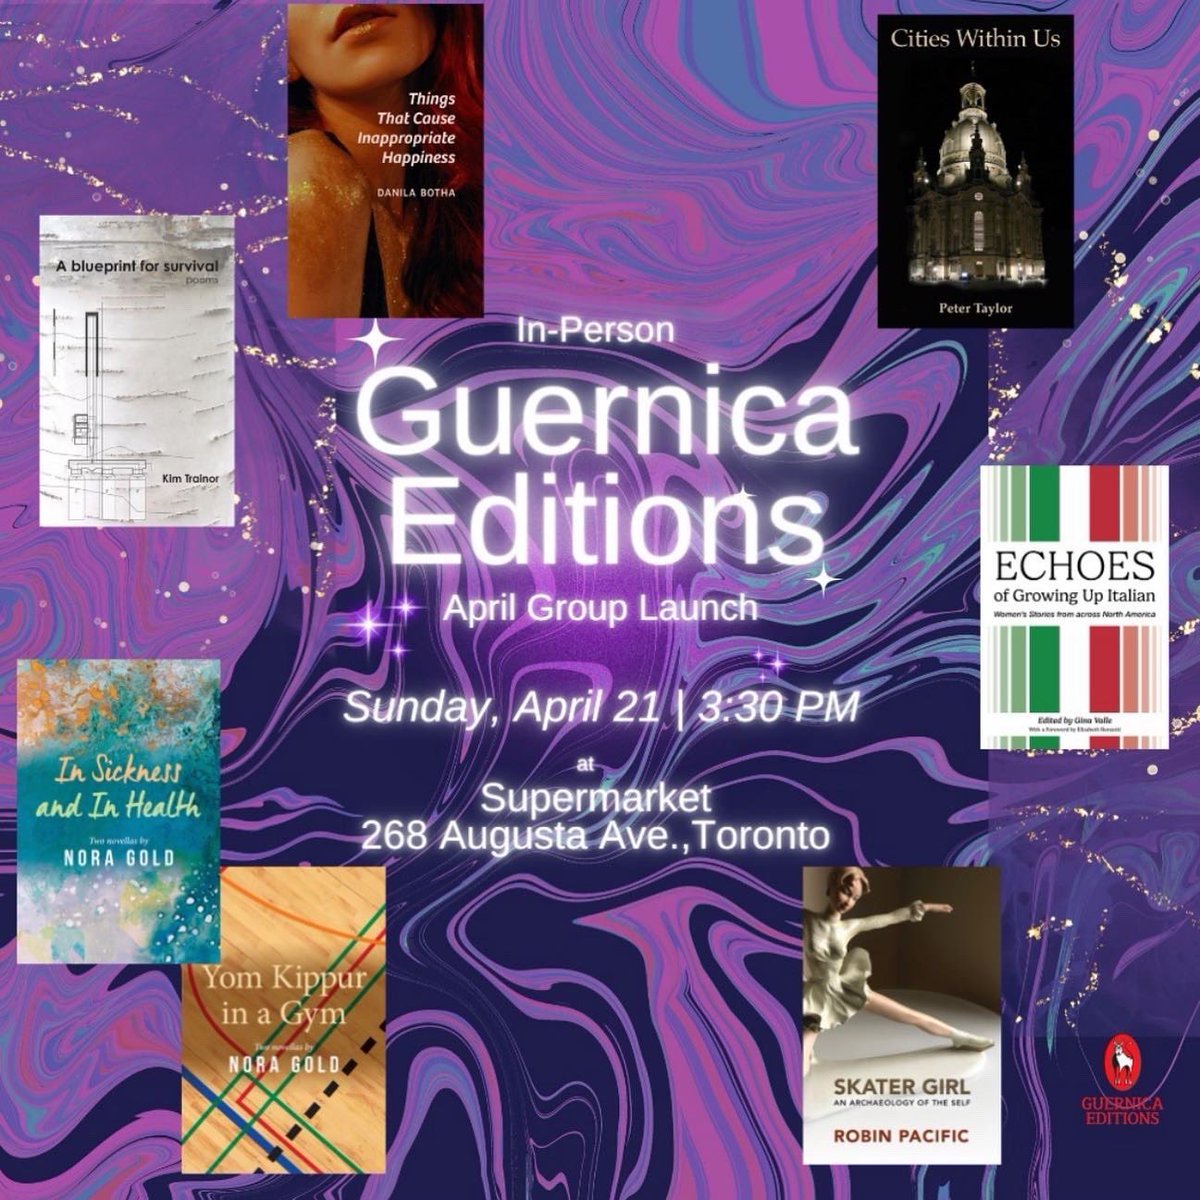 So thrilled to get to do three events in April to launch my upcoming @guernica_ed book Things That Cause Inappropriate Happiness with such amazing authors @NoraGold Samantha Bailey @wanlittlehusk Rebecca Rosenblum, K Trainor, Peter Taylor, Gina Valle, and Robin Pacific ❤️❤️📚📚🎉